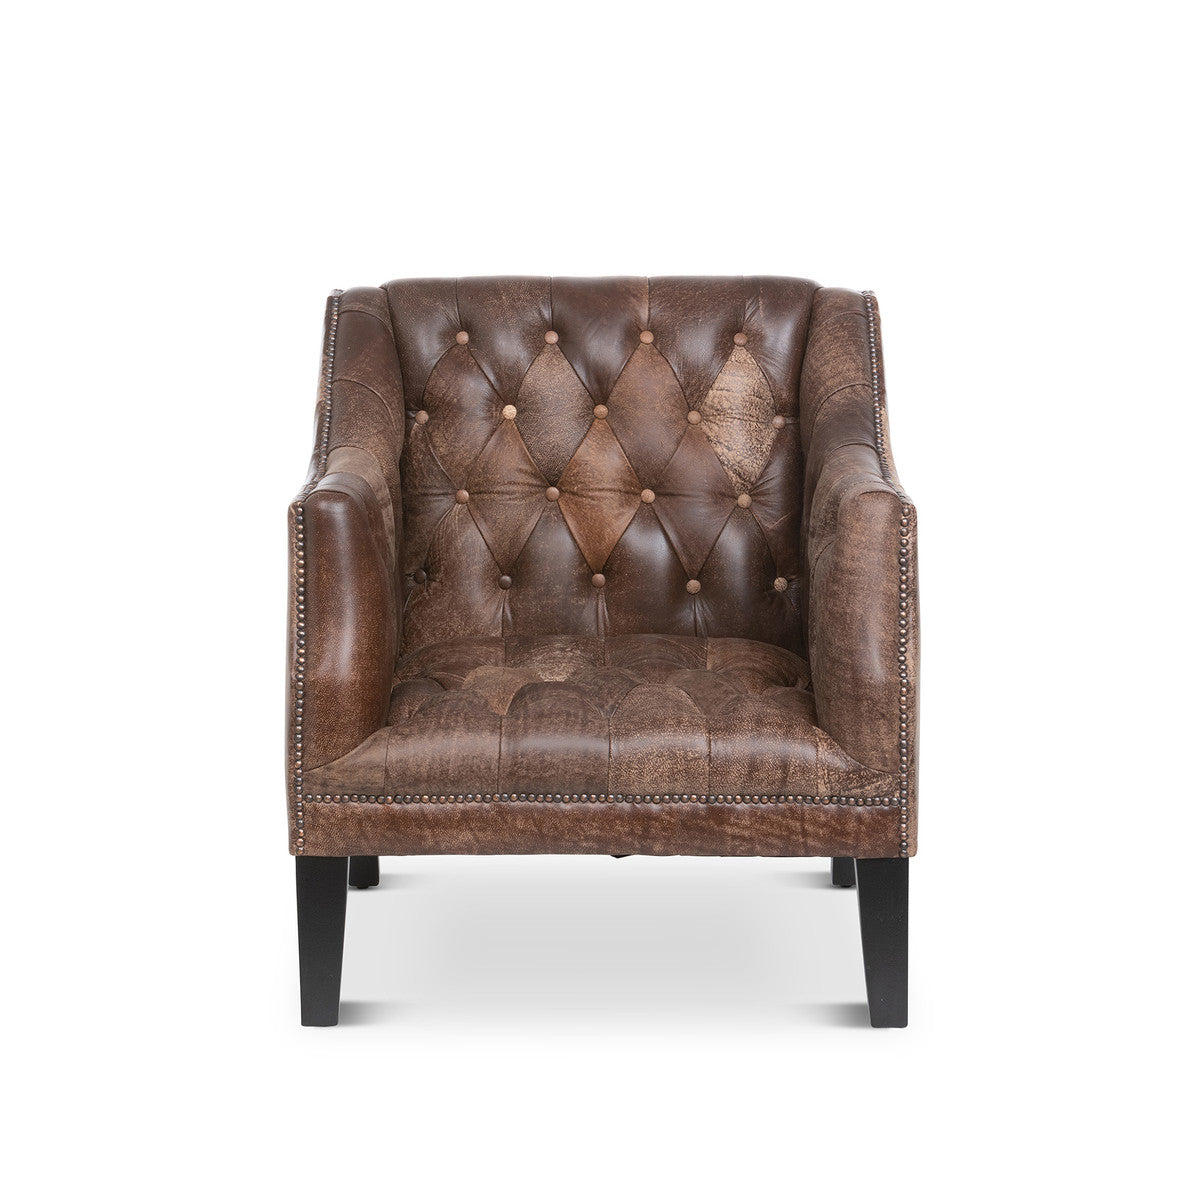 Brent Tufted Leather Club Chair, Vintage Umber